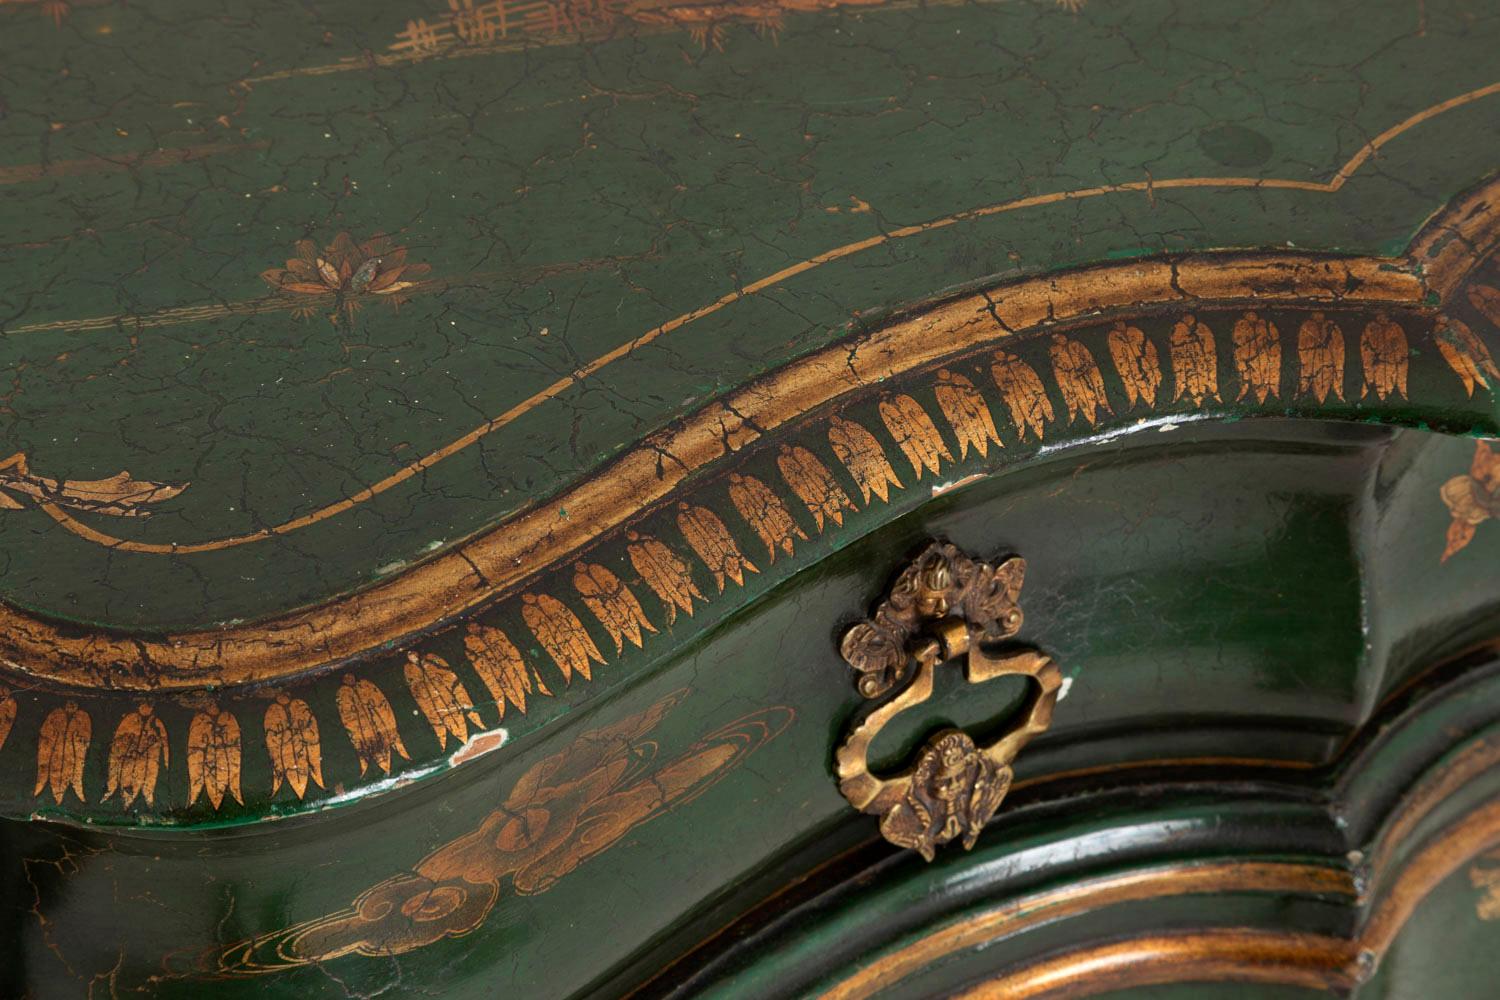 Serpentine Commode in Green Lacquered Wood, Chinese Decoration, 1950s (20. Jahrhundert)